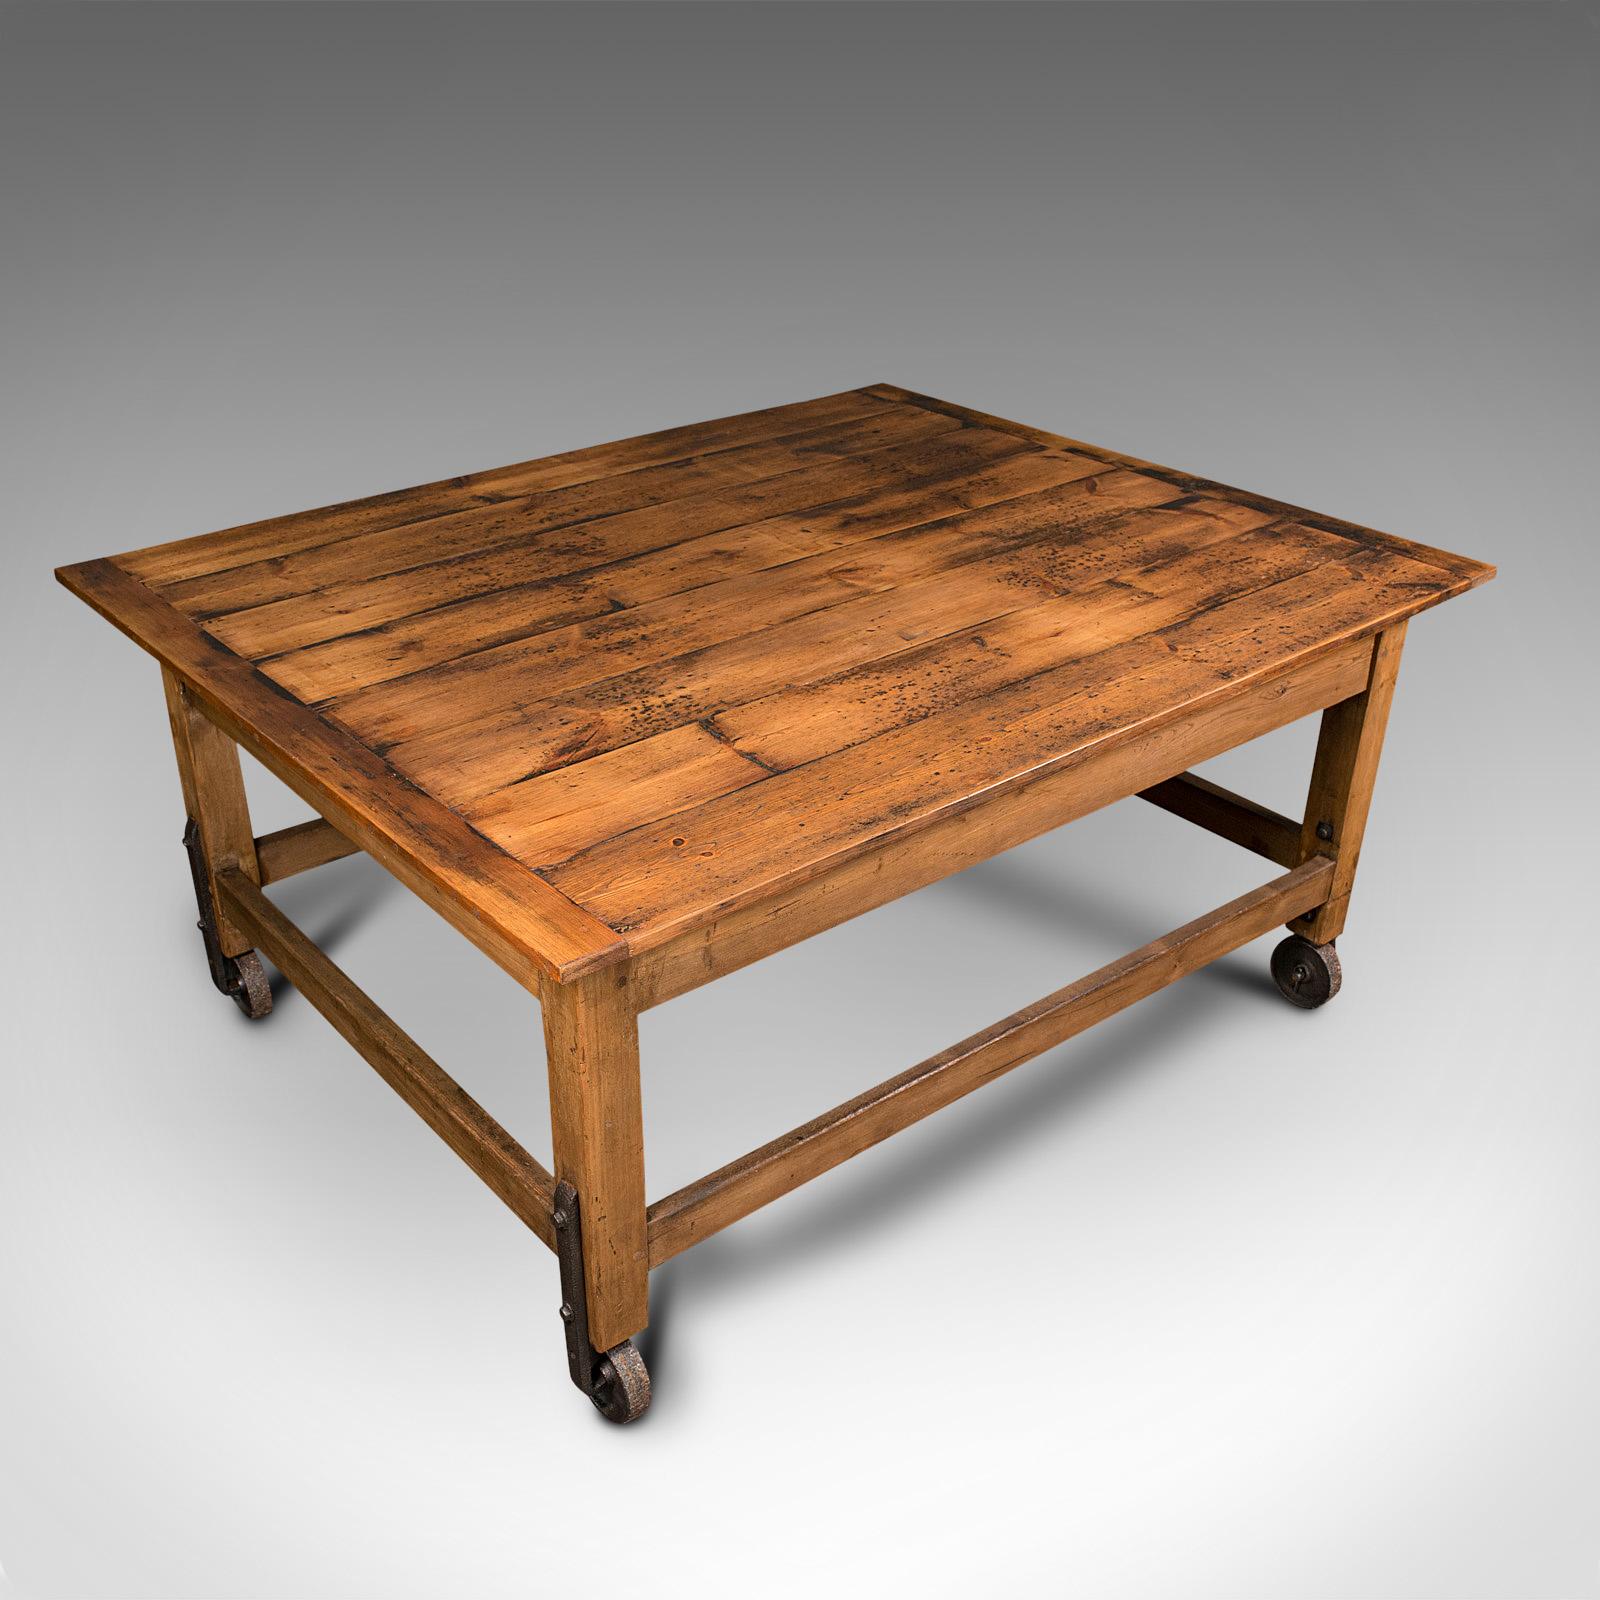 19th Century Antique Boulangerie Table, French, Pine, Shop, Bakery, Display, Victorian, 1880